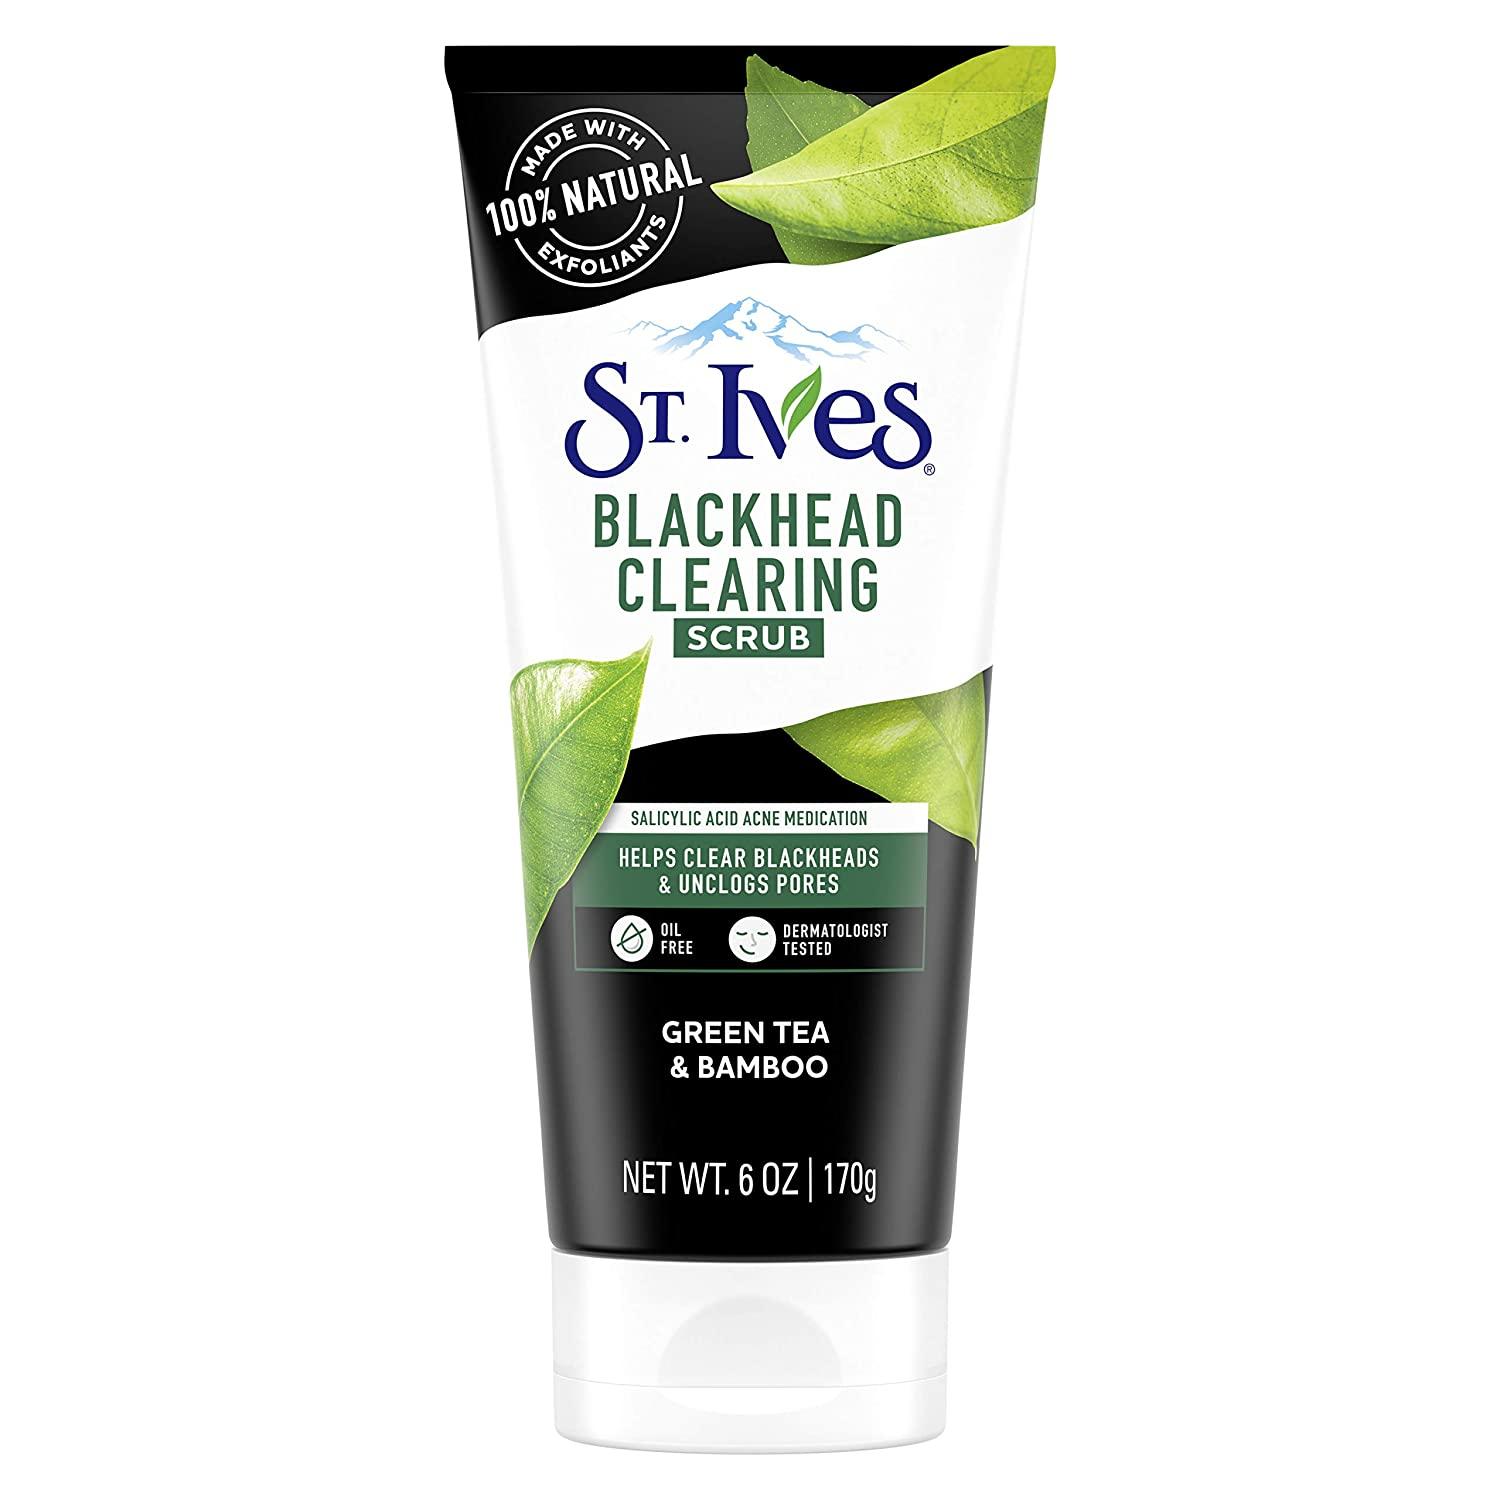 3 St Ives Blackhead Clearing Face Scrub for $7.38 Shipped